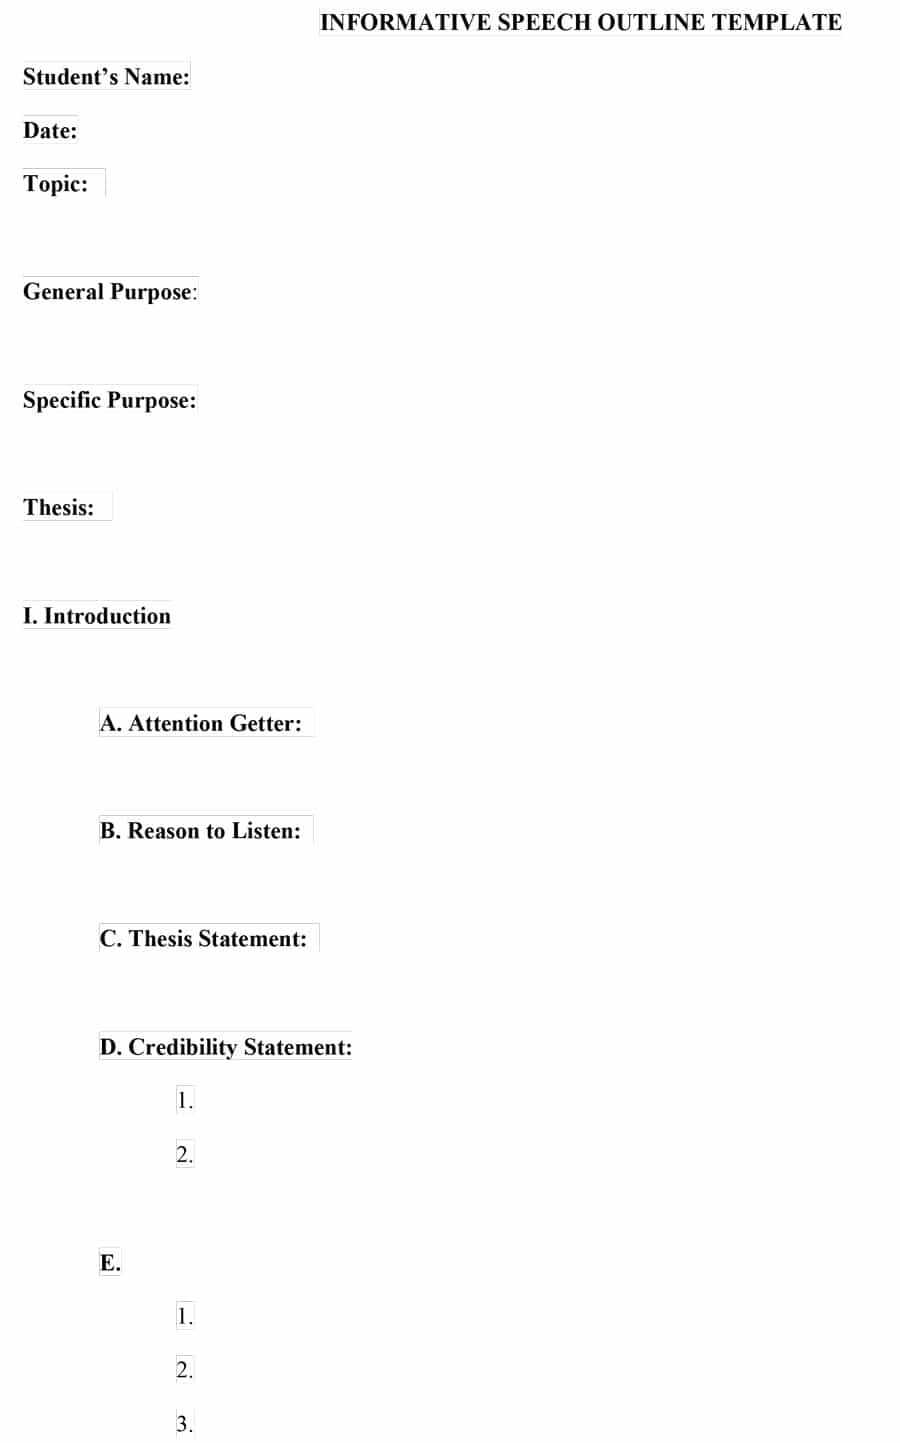 43 Informative Speech Outline Templates & Examples Inside Speech Outline Template Word